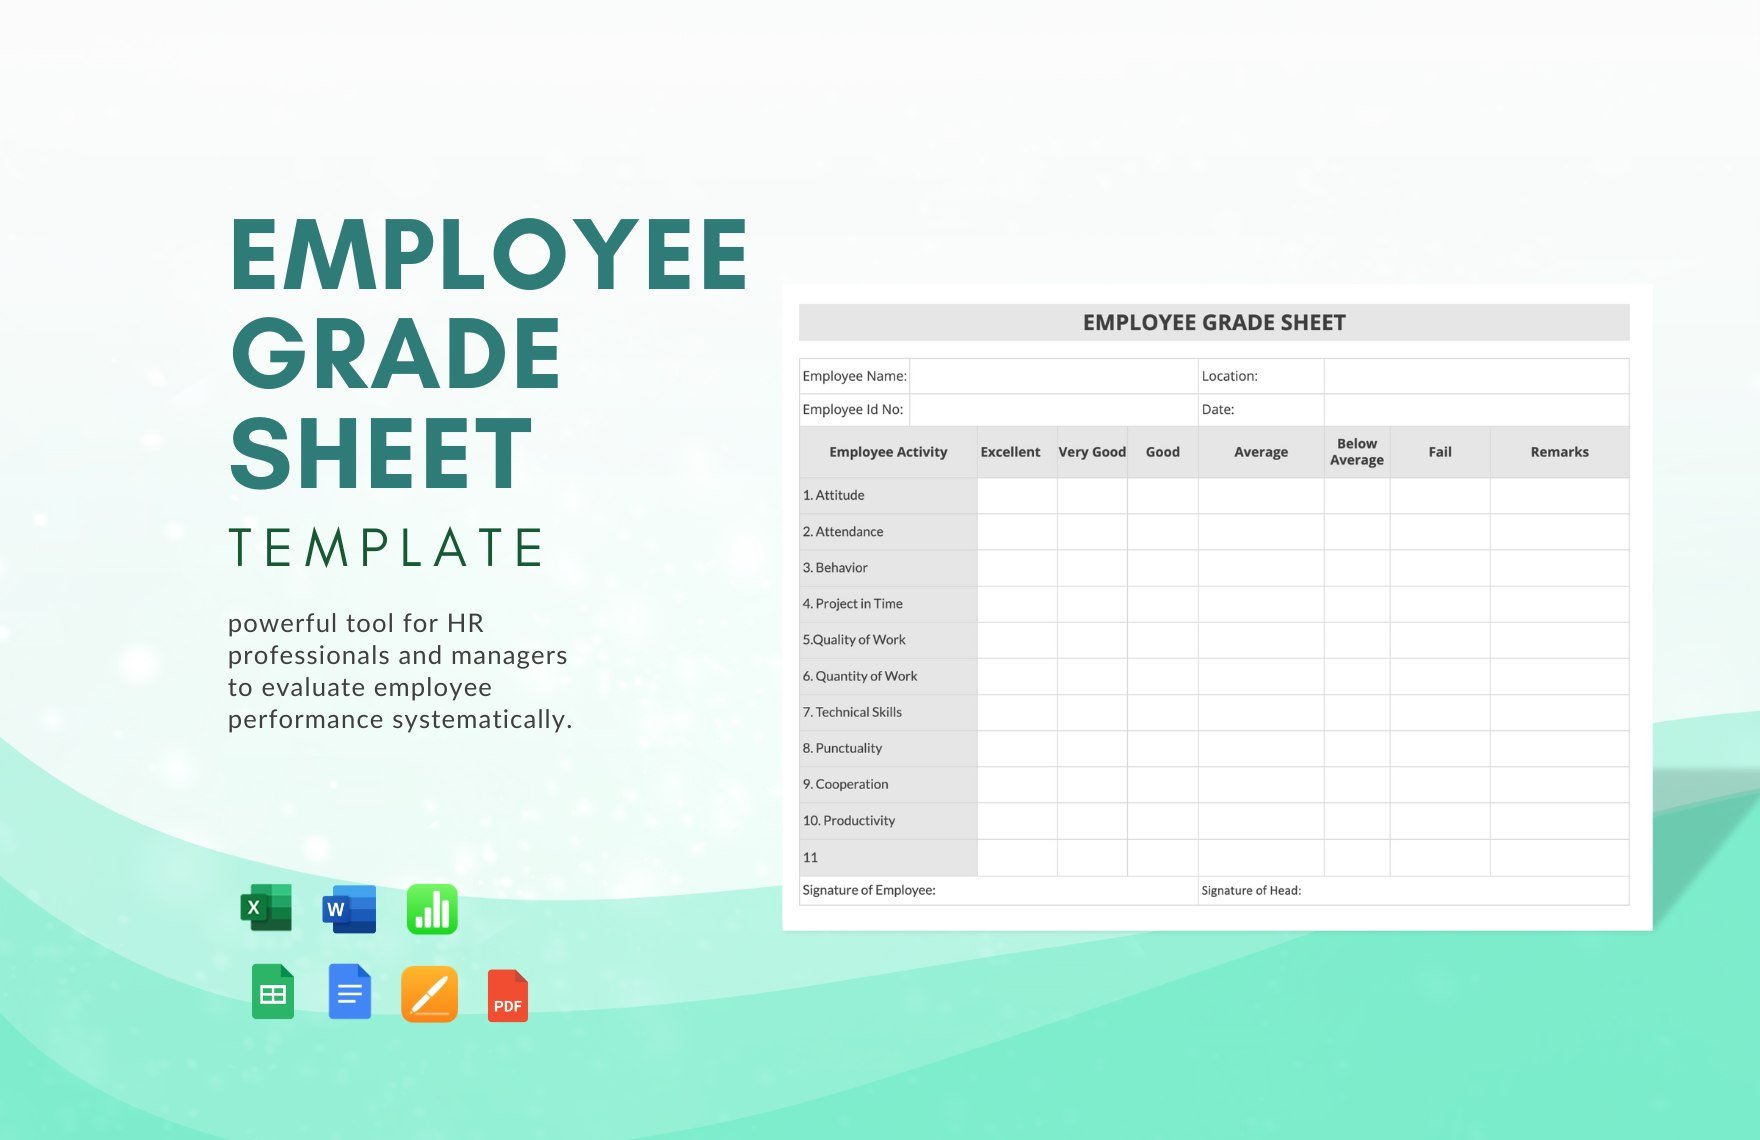 Employee Grade Sheet Template in Word, Google Docs, Excel, PDF, Google Sheets, Apple Pages, Apple Numbers